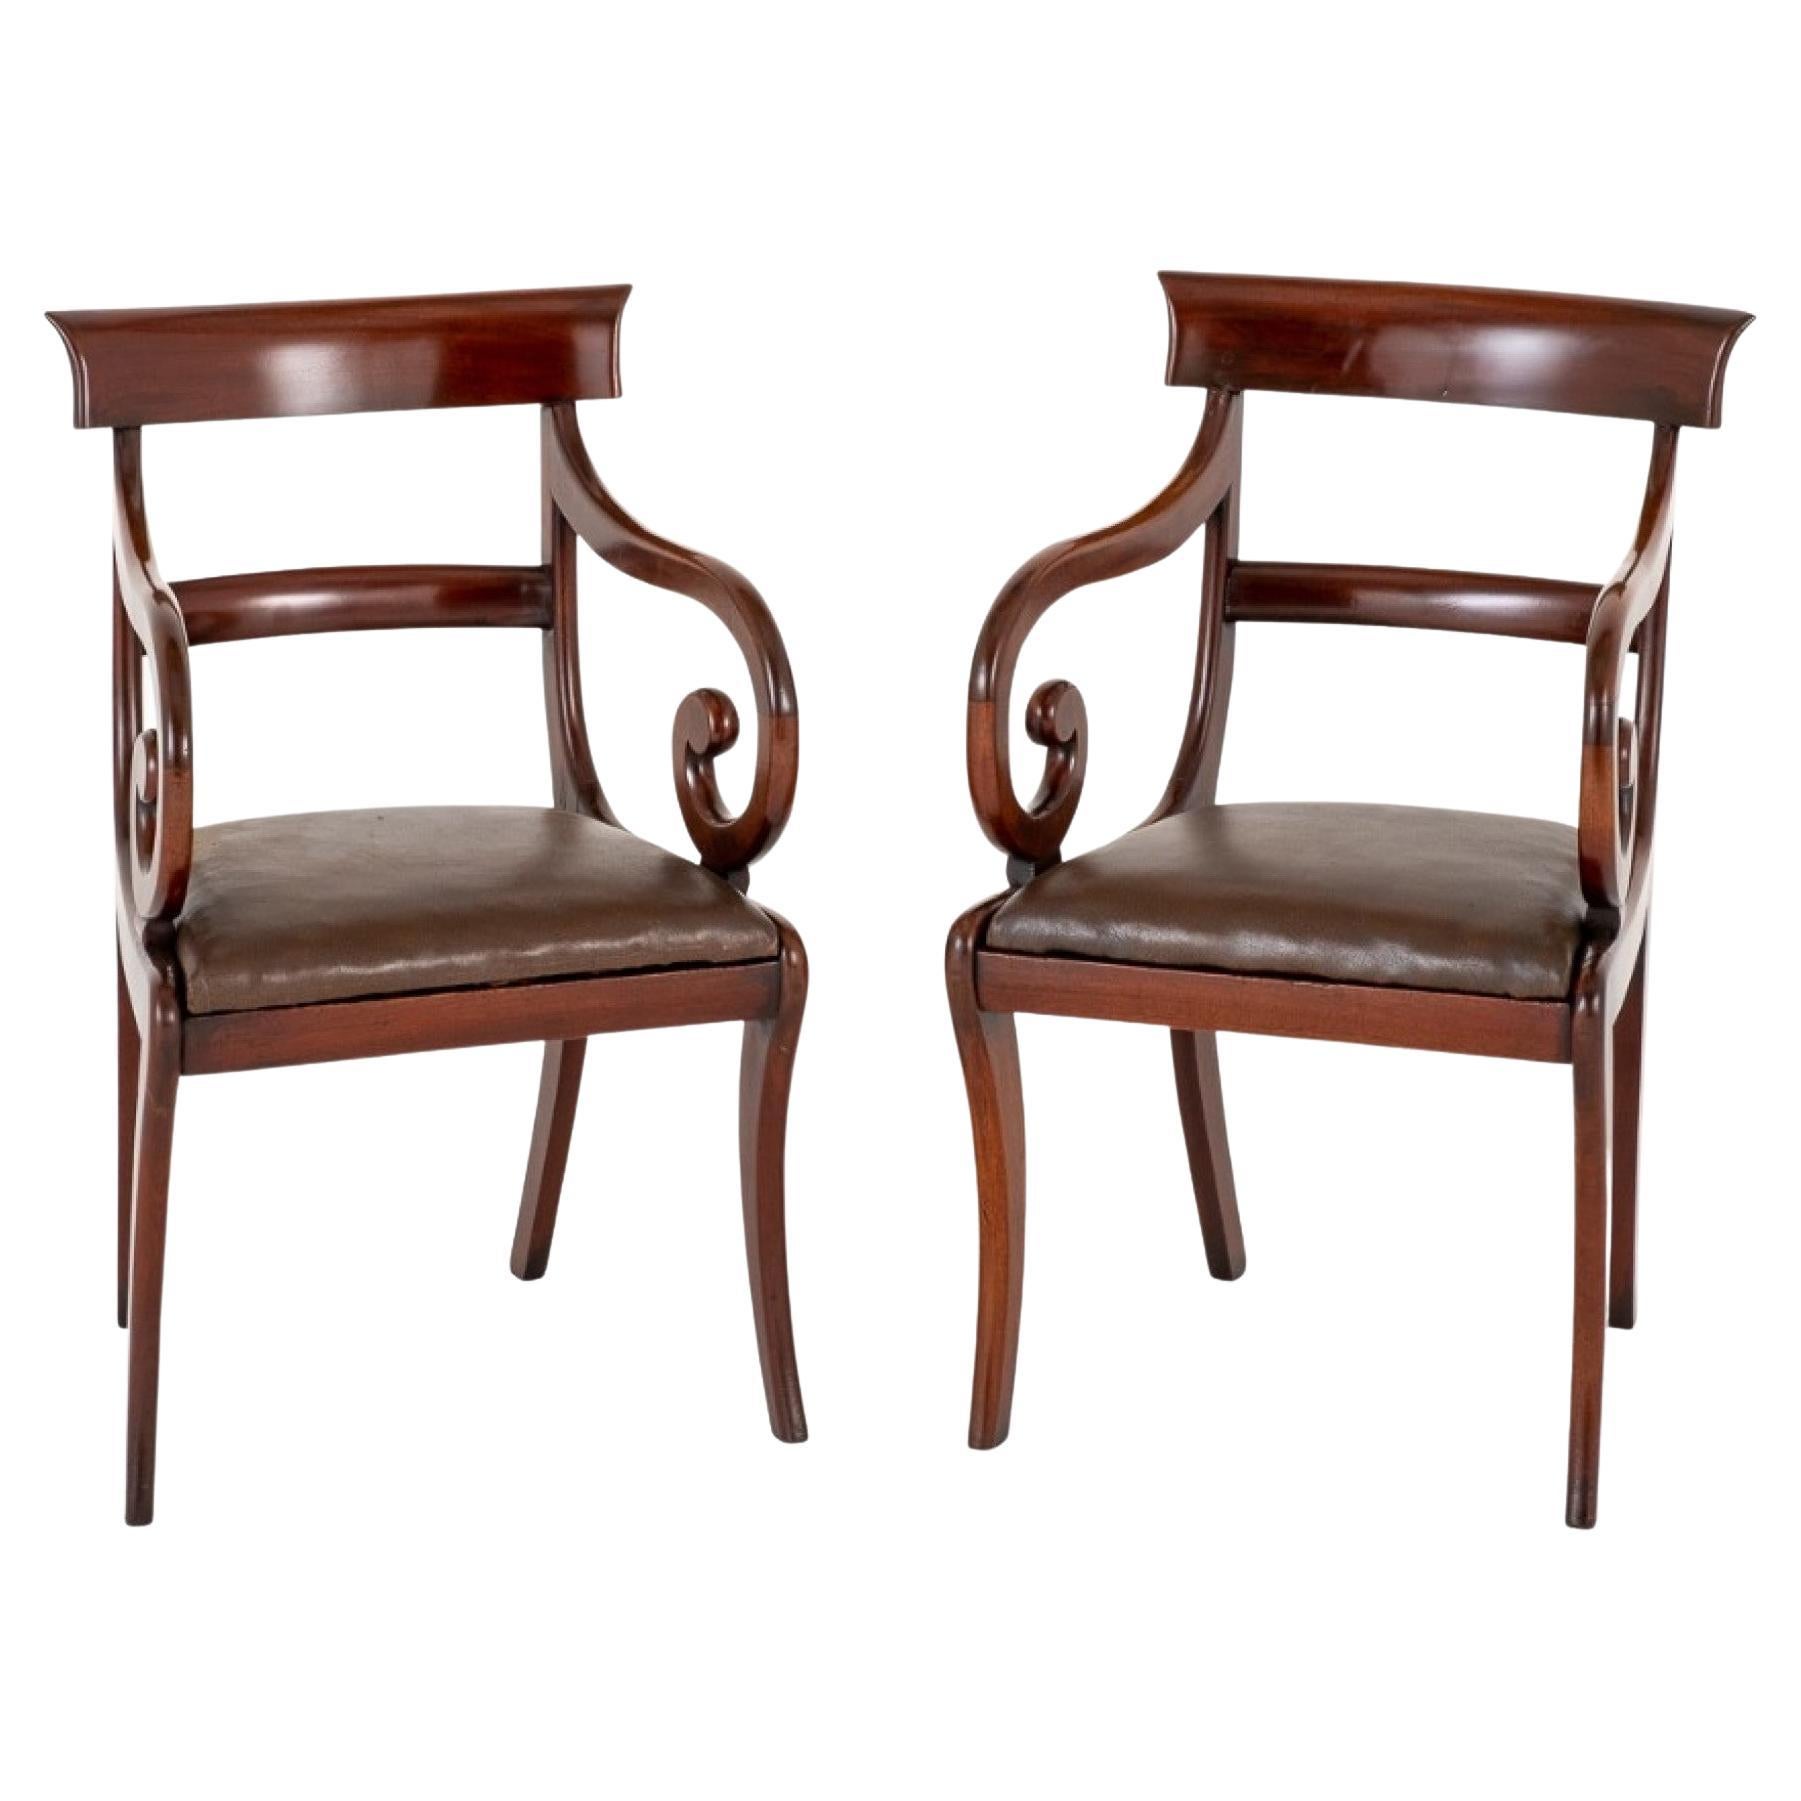 Pair Regency Elbow Chairs Mahogany Period Furniture For Sale